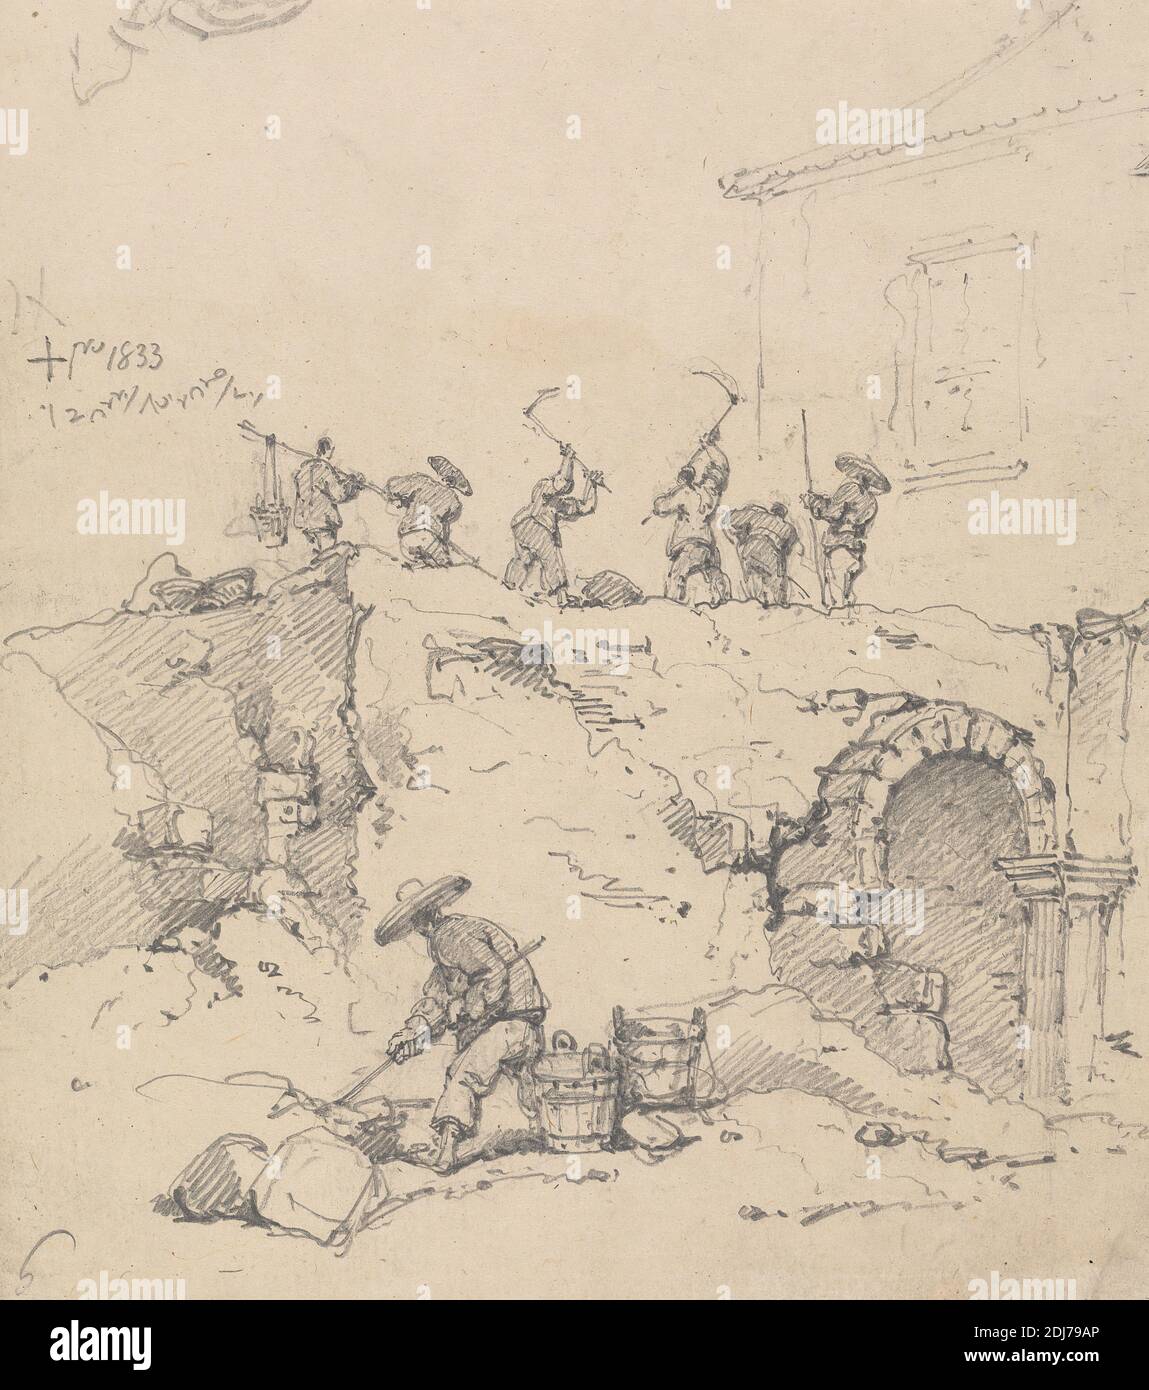 Chinese Coolies Demolishing a Building, George Chinnery, 1774–1852, British, 1833, Graphite on medium, slightly textured, cream wove paper, Sheet: 7 3/4 × 6 7/8 inches (19.7 × 17.5 cm), arch, building, demolition, figure study, landscape, workers, China Stock Photo